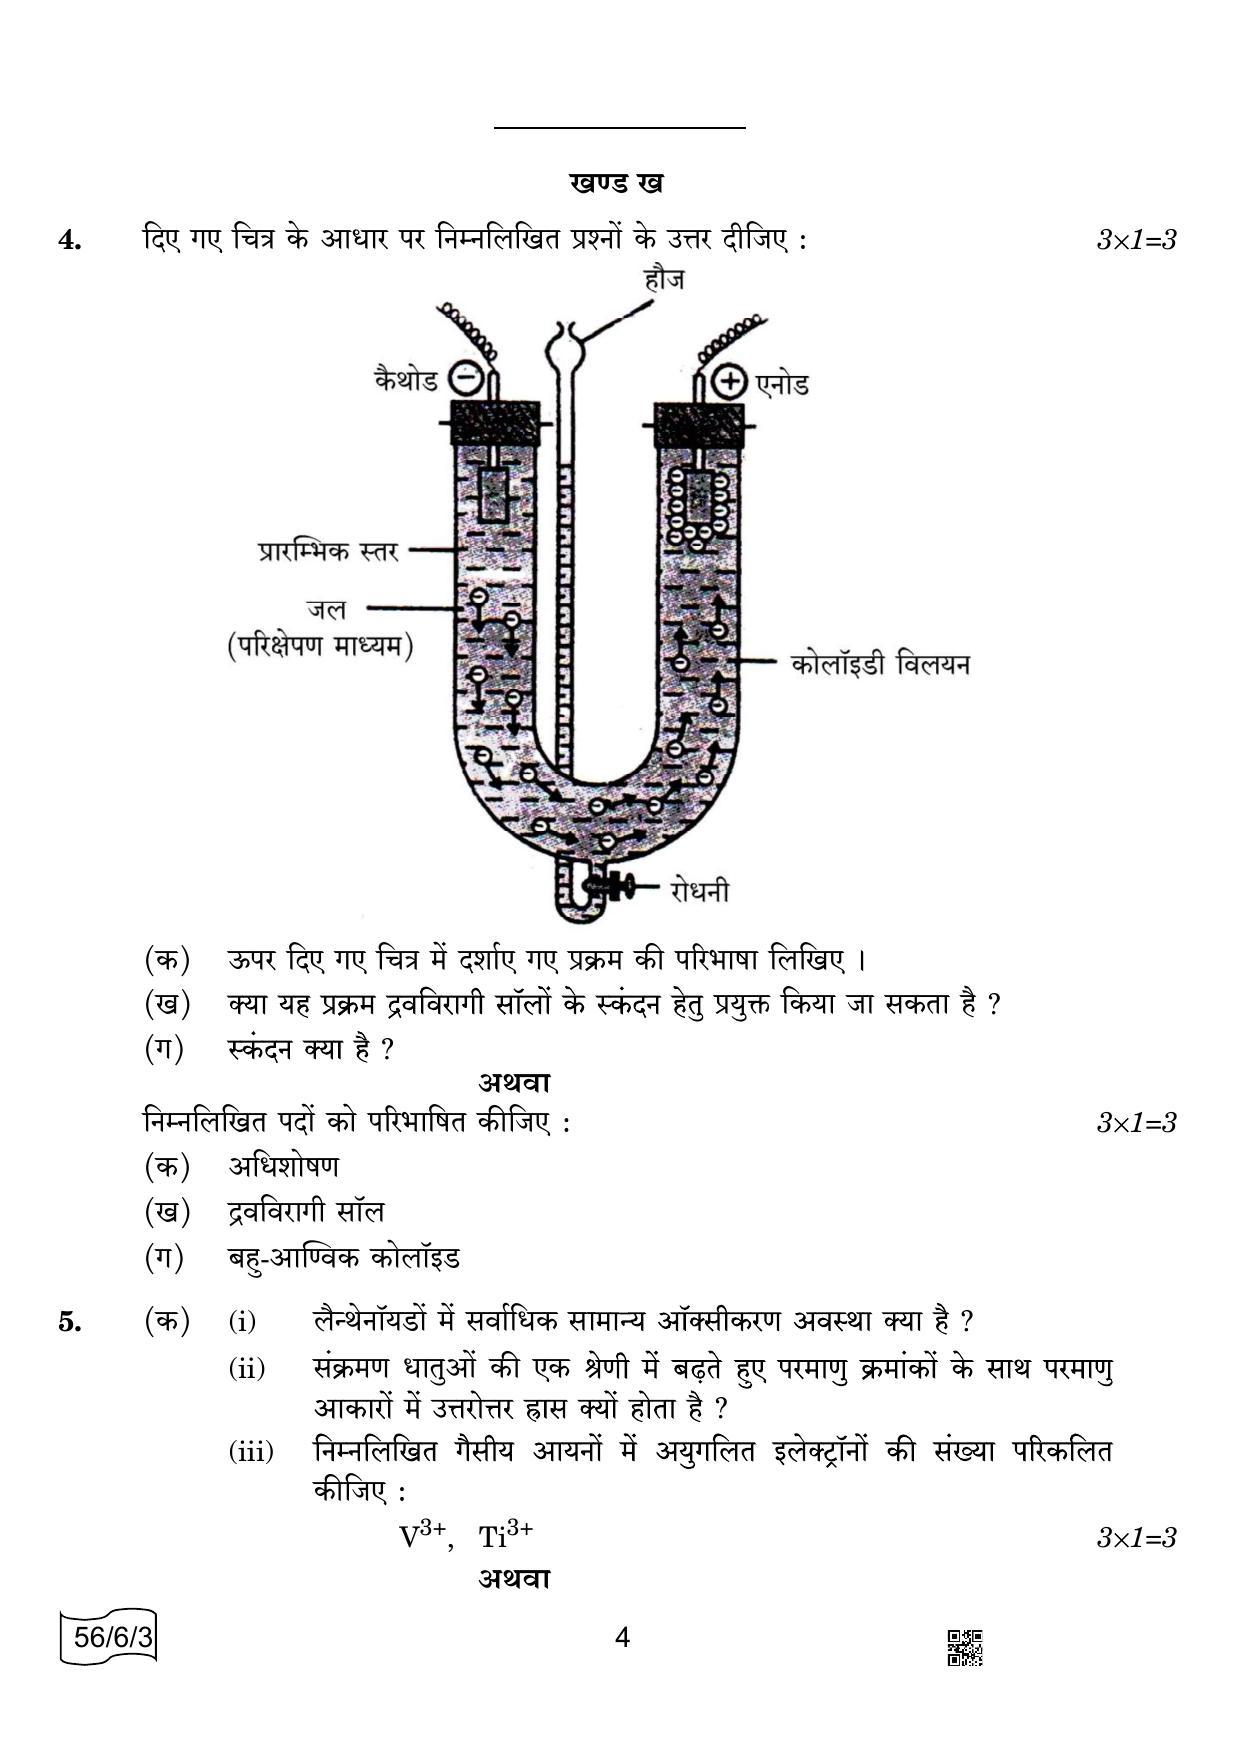 CBSE Class 12 56-6-3 CHEMISTRY 2022 Compartment Question Paper - Page 4